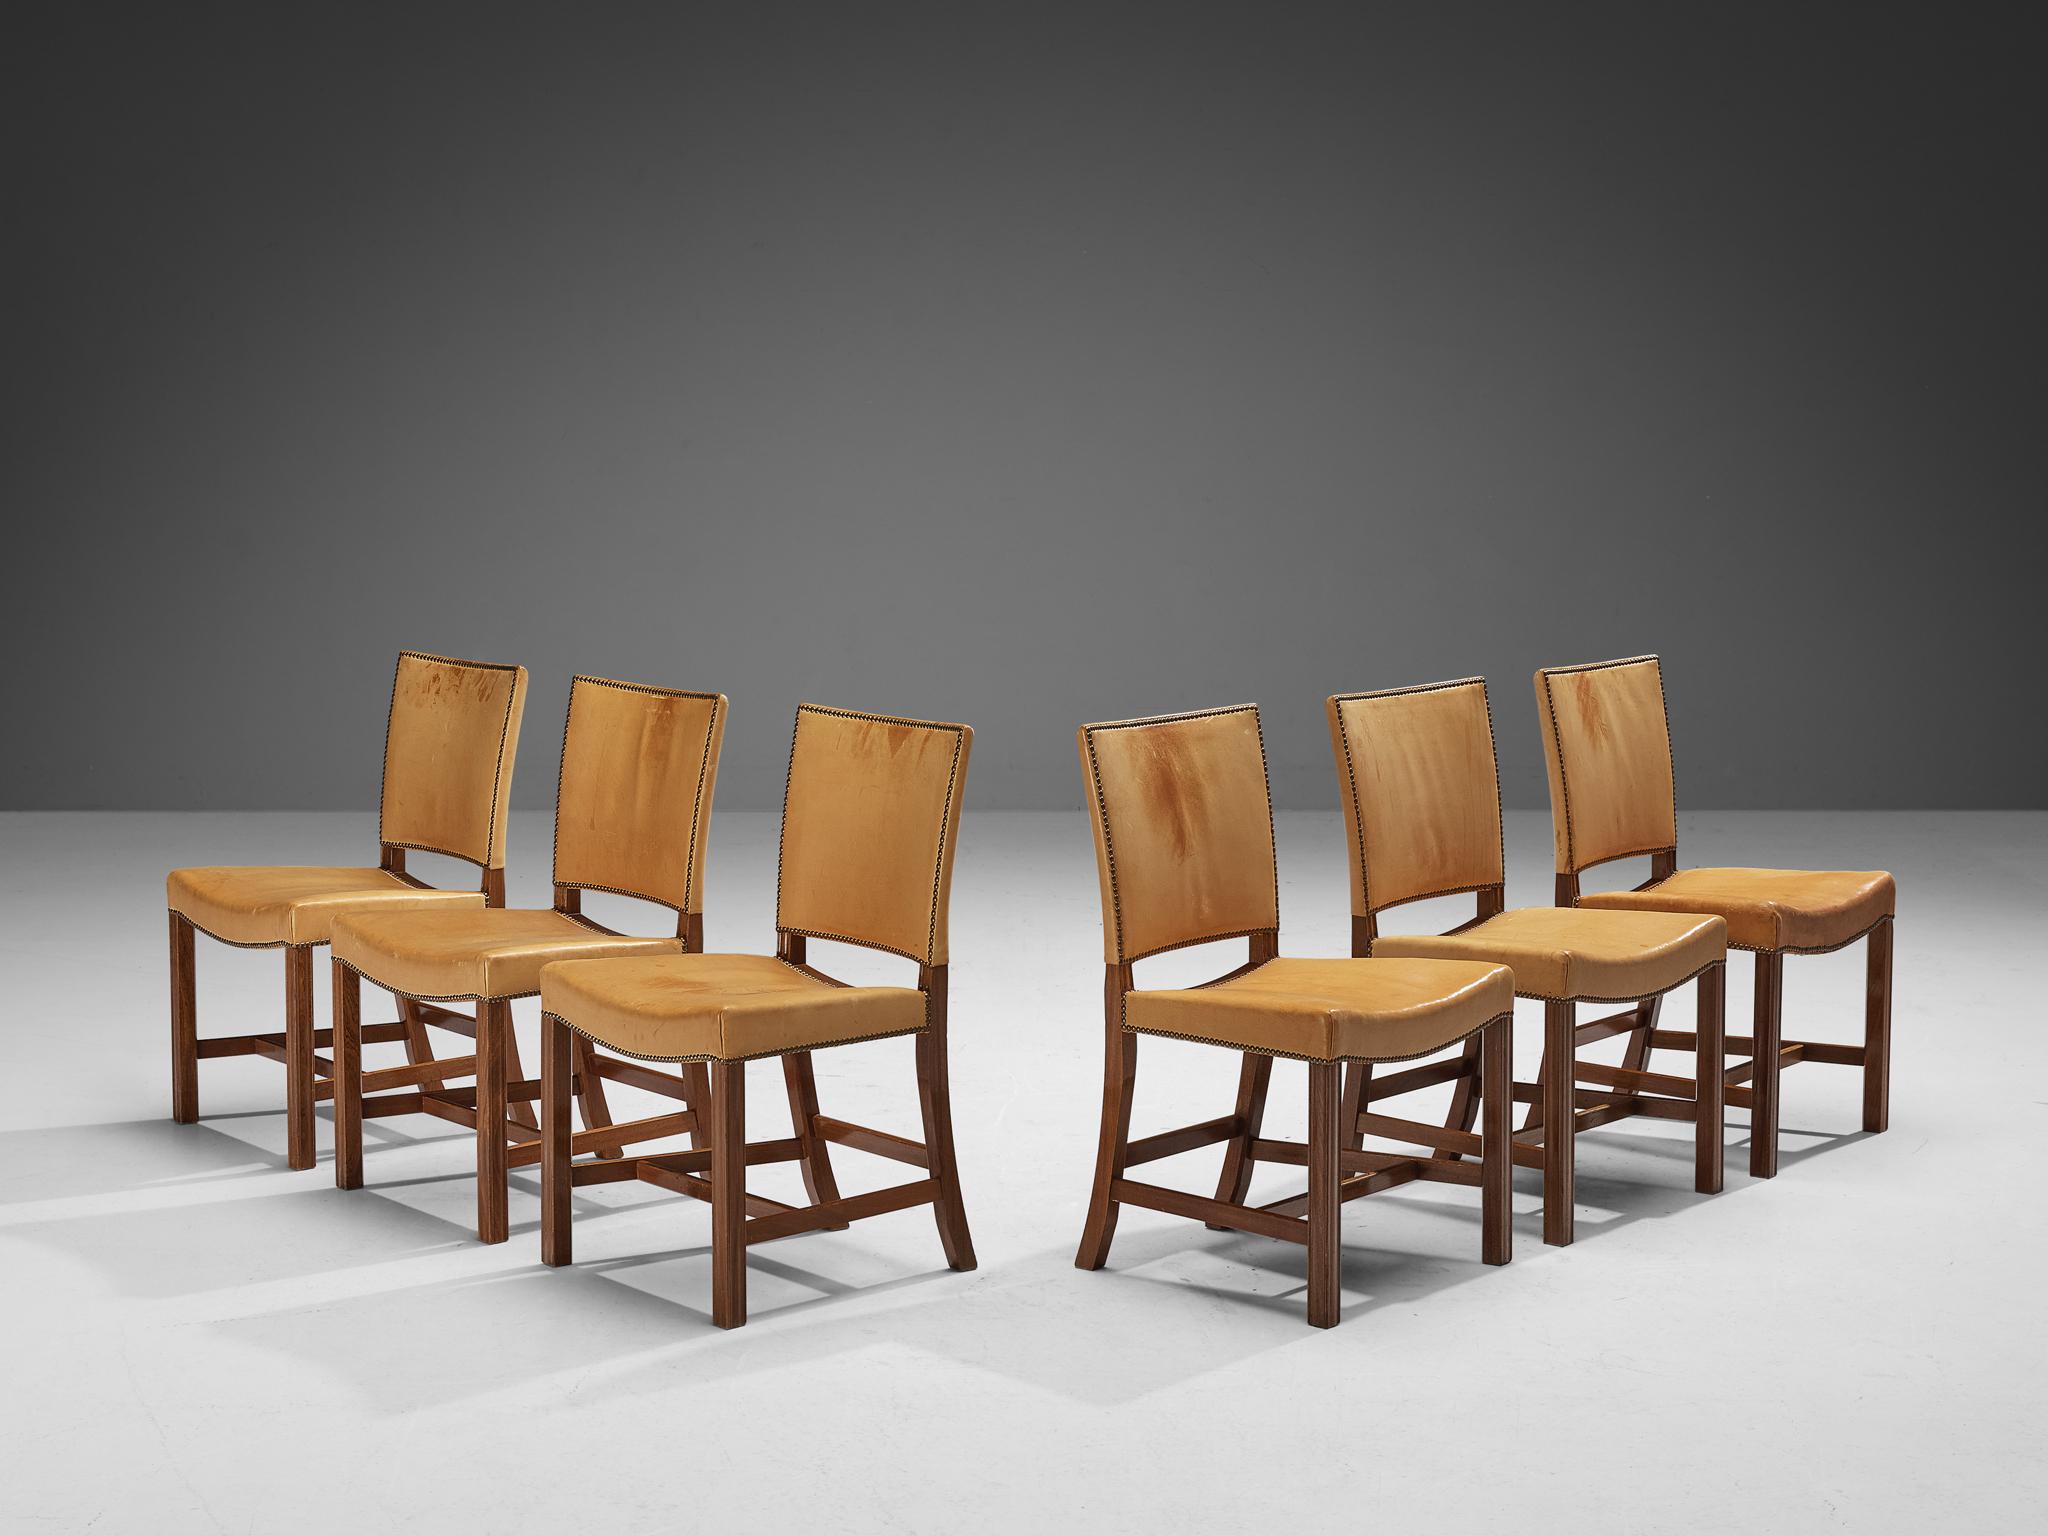 Kaare Klint for Rud Rasmussen, set of six dining chairs, 'The Red Chair', model 4751, original patinated leather, mahogany, brass Denmark, designed 1933, manufactured 1960s

These eloquent dining chairs in camel leather upholstery are designed in